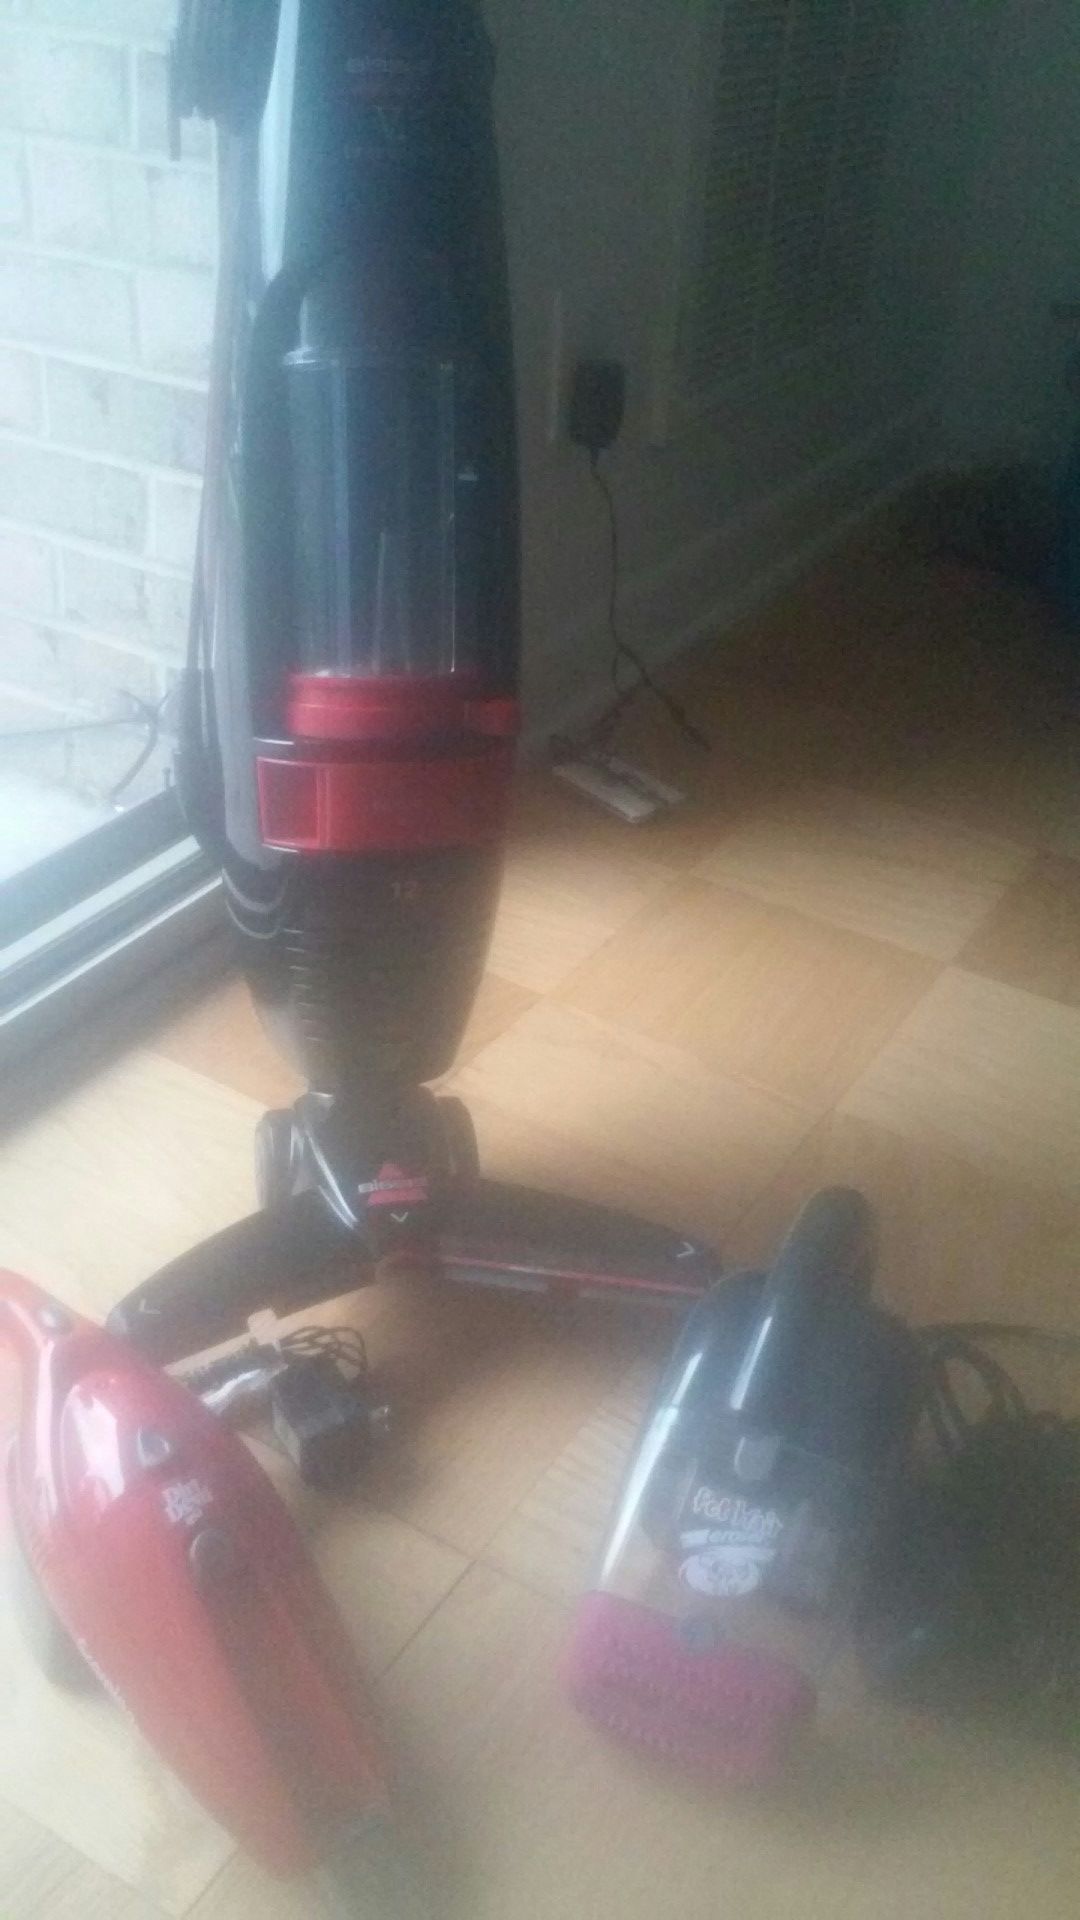 Bissell lightweight vacuum along with pet vac and Dirt Devil handheld vacuum